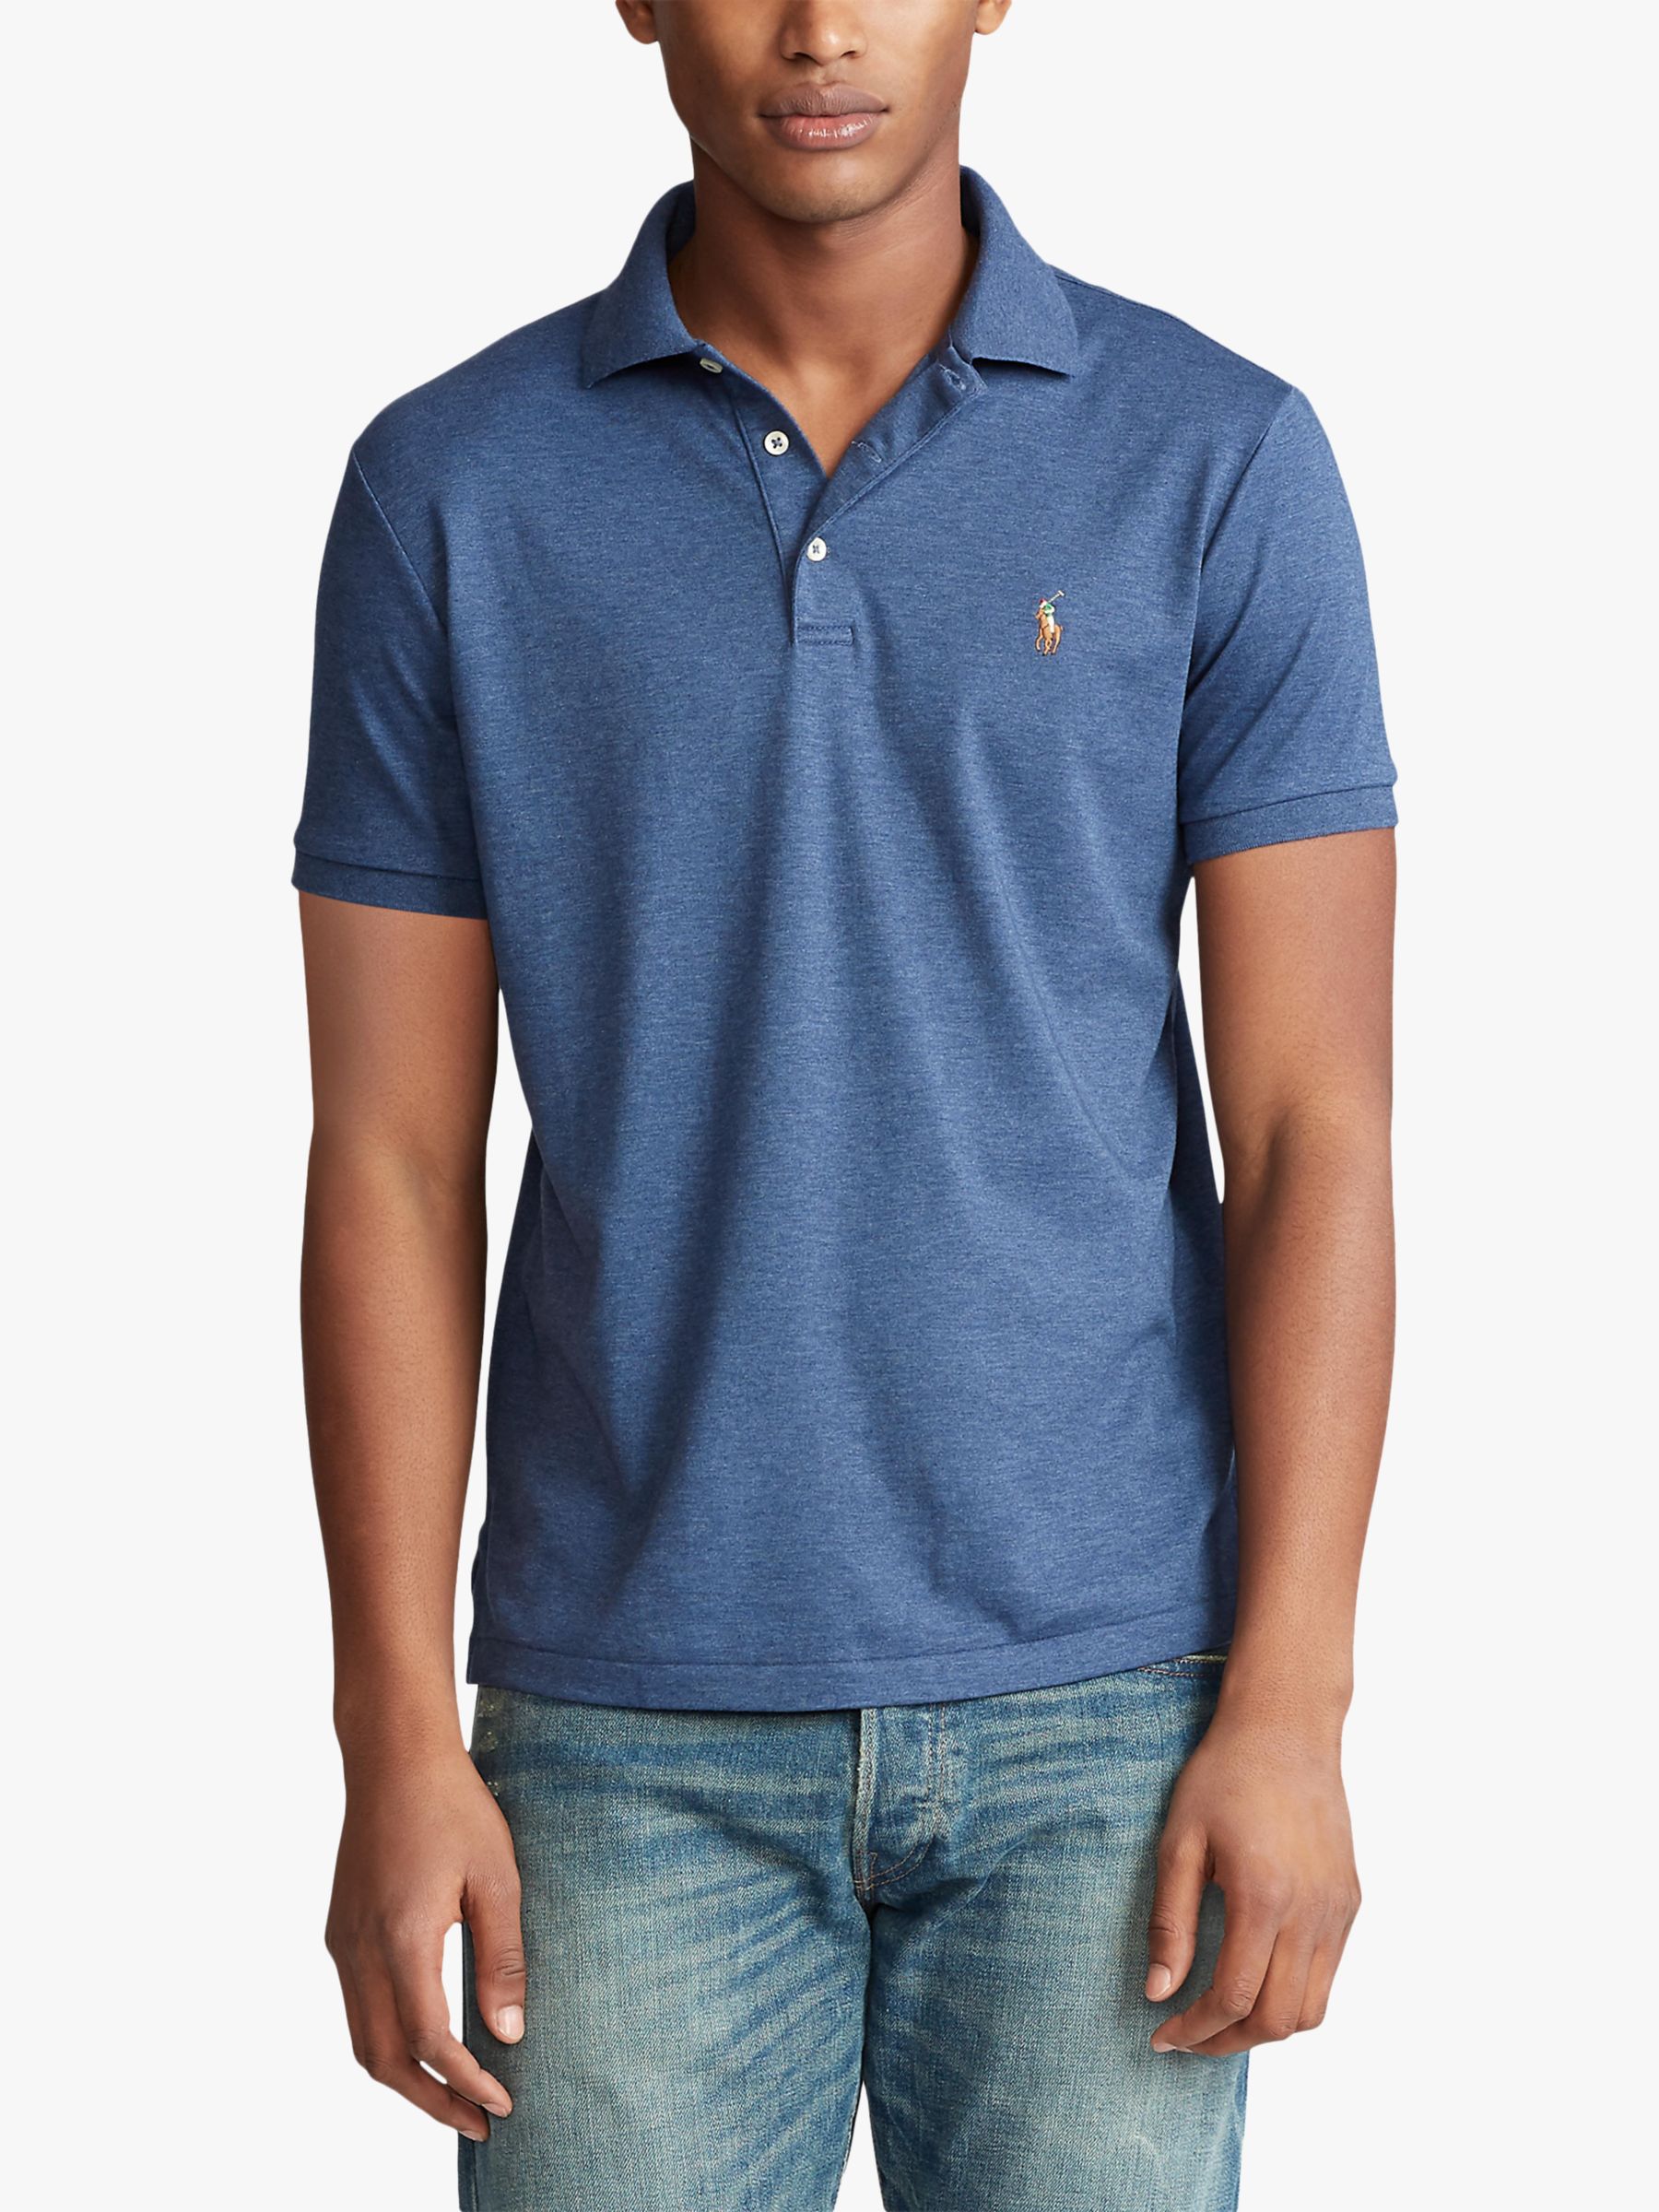 Polo Ralph Lauren Custom Slim Fit Soft Cotton Polo Shirt Blue Heather At John Lewis And Partners